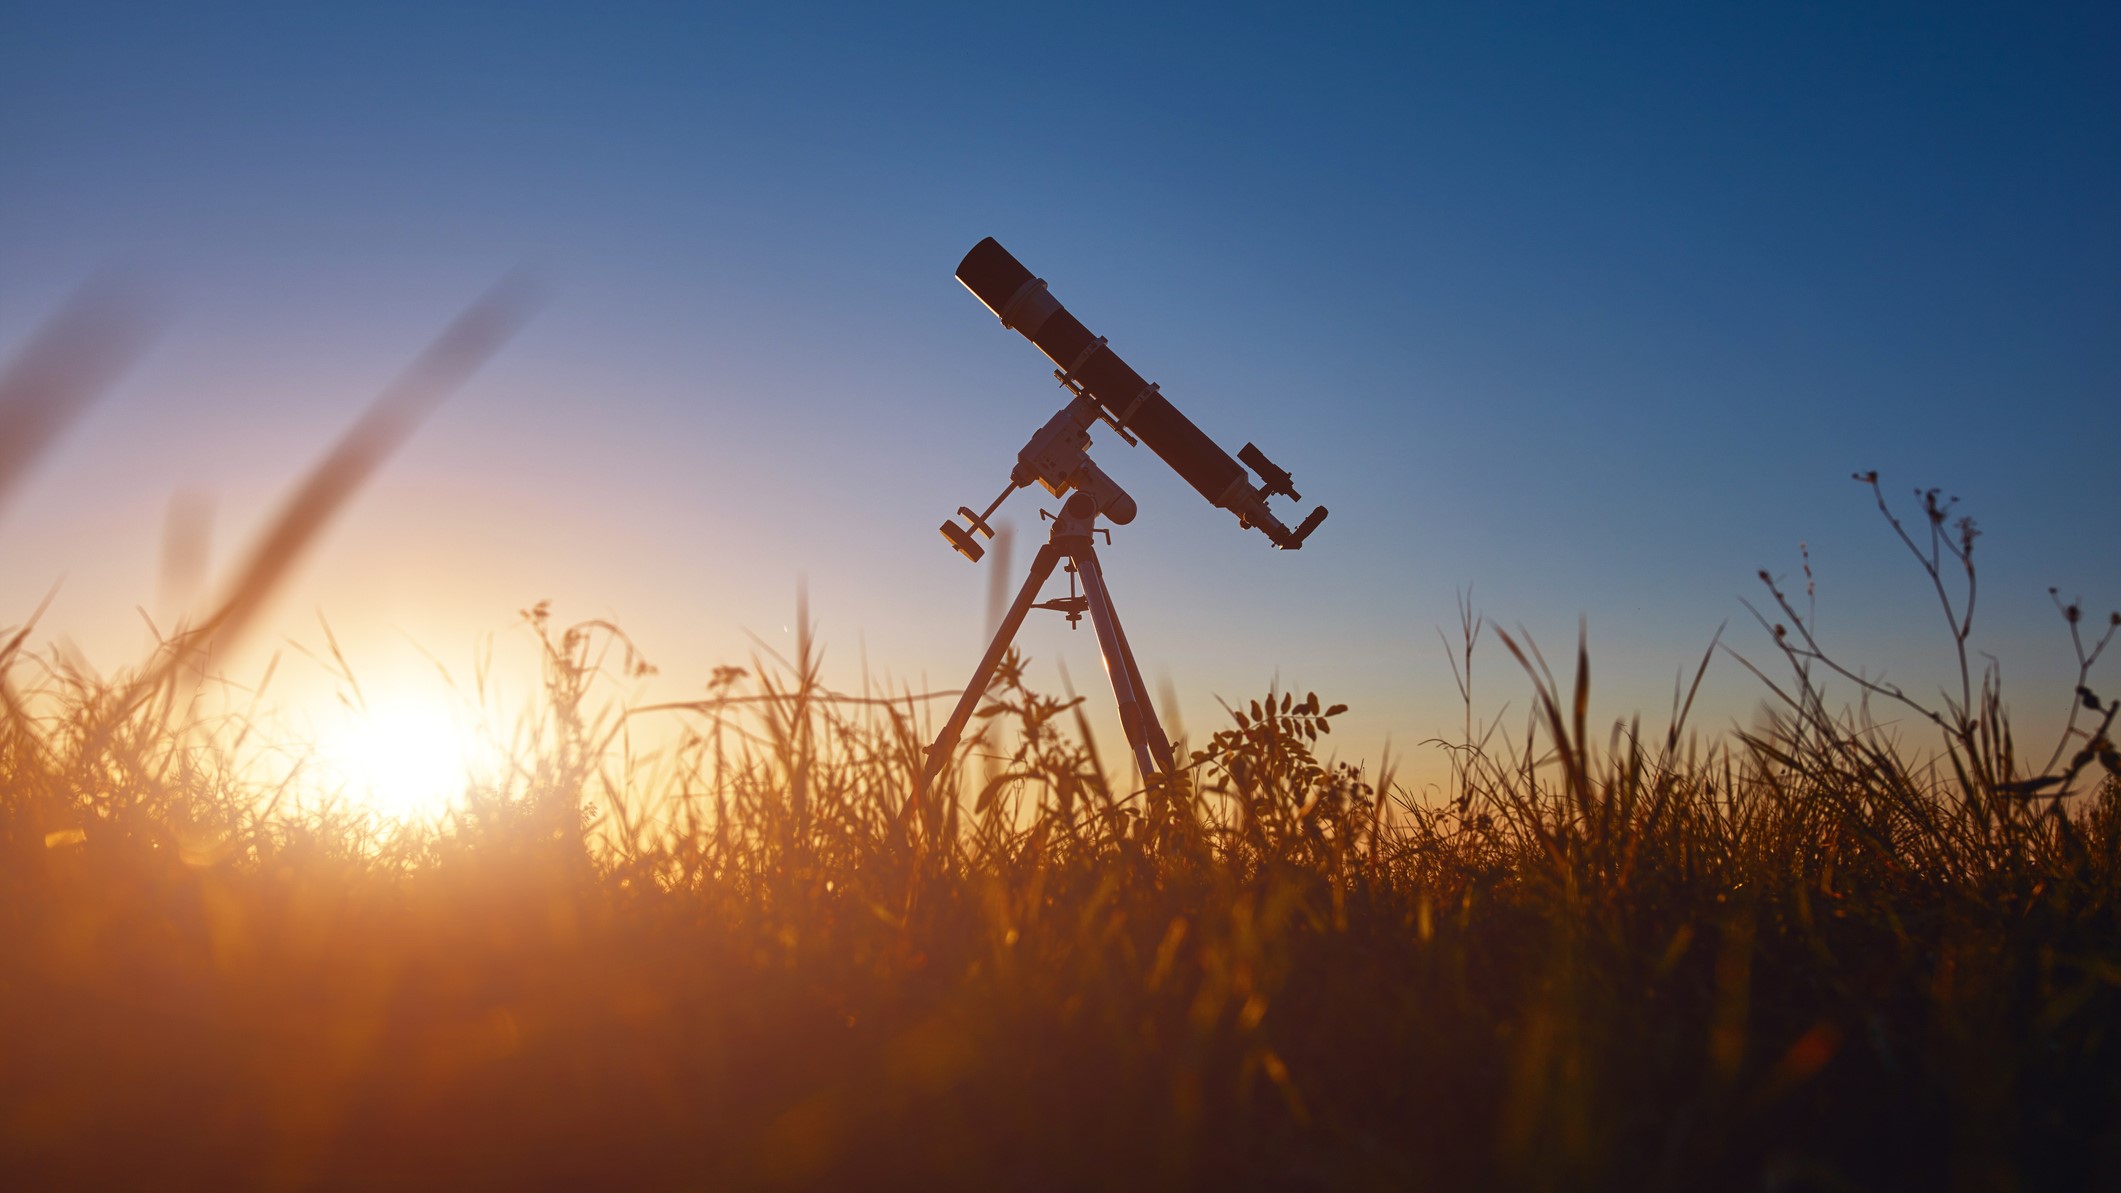 Telescope silhouette in a field with the sun setting behind.